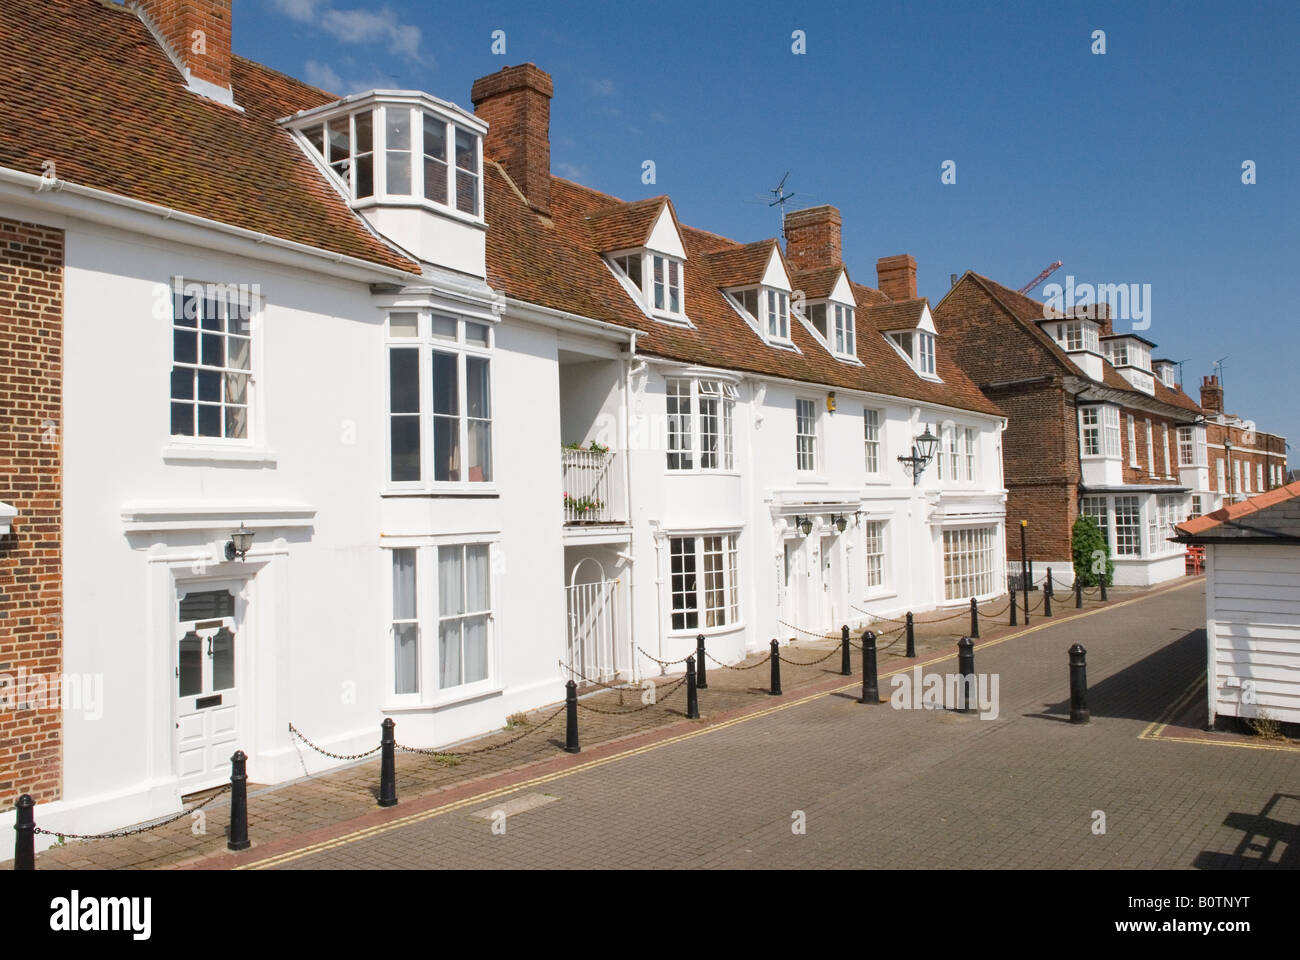 Burnham on Crouch] Essex East Anglia The Quay traditional white Victorian buildings Stock Photo